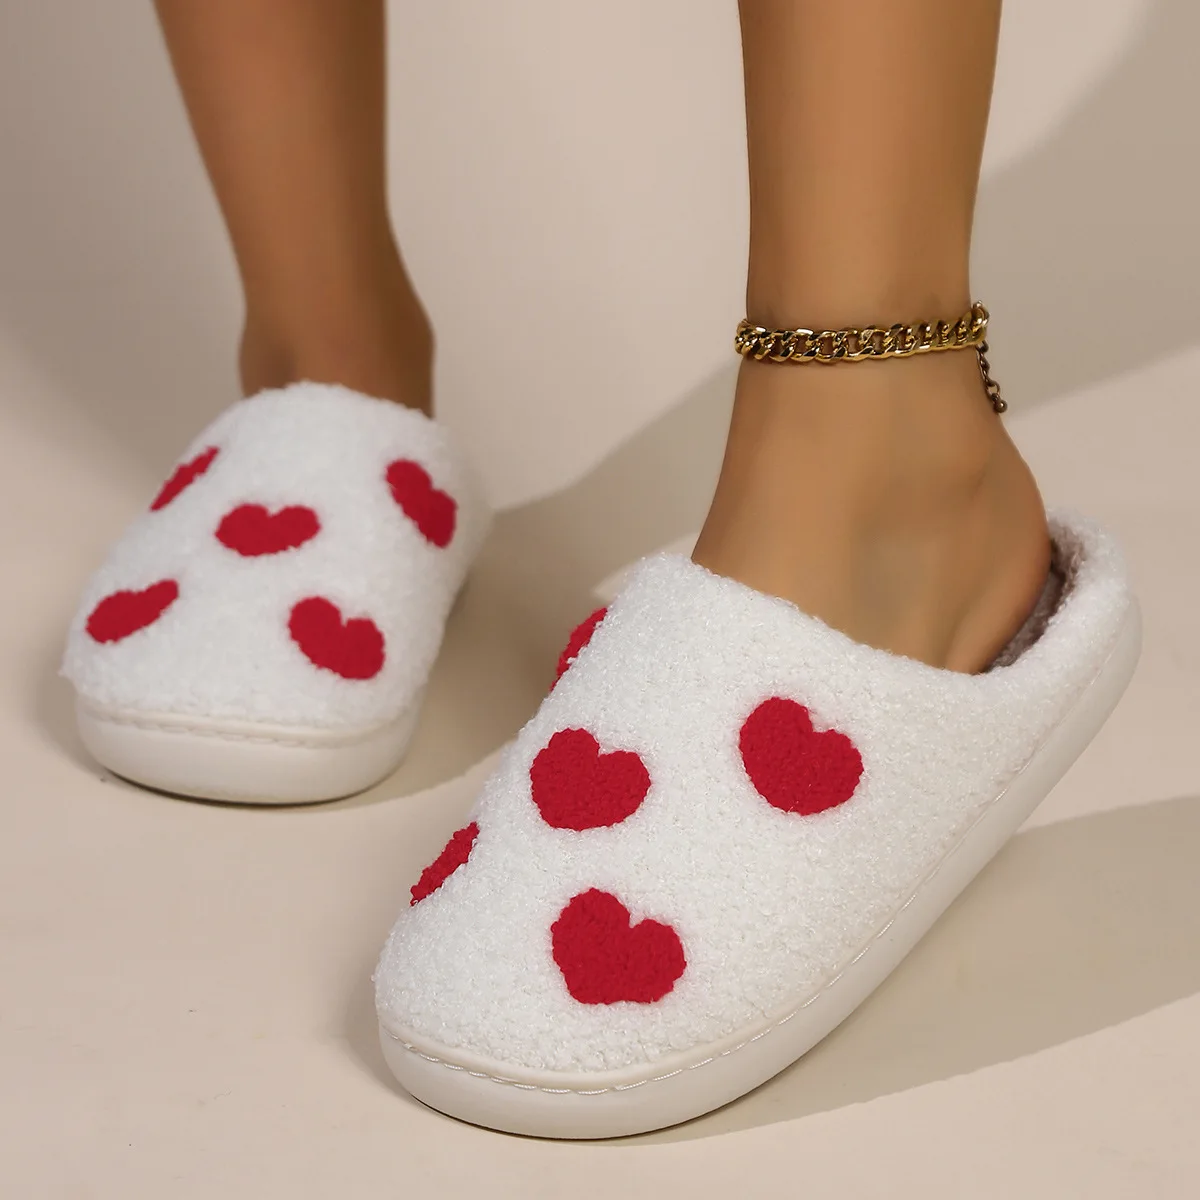 

UHV New Pink Smiley Face Slippers Women Smile Slippers Happy Face Retro Soft Plush Comfy Warm Slip-on Slippers